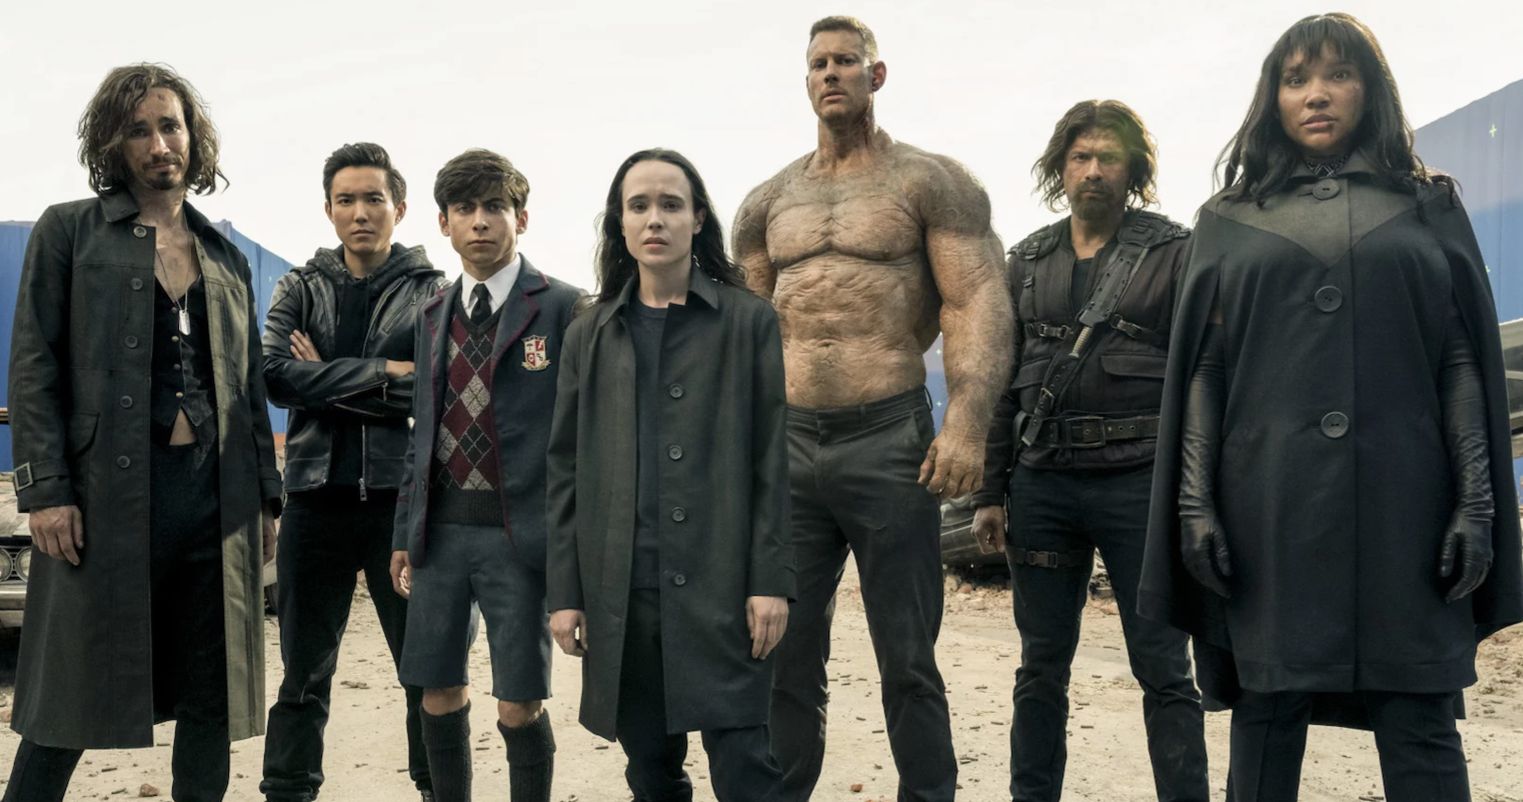 The Umbrella Academy Star Tom Hopper Shares Season 3 Update: We're in a Great Place